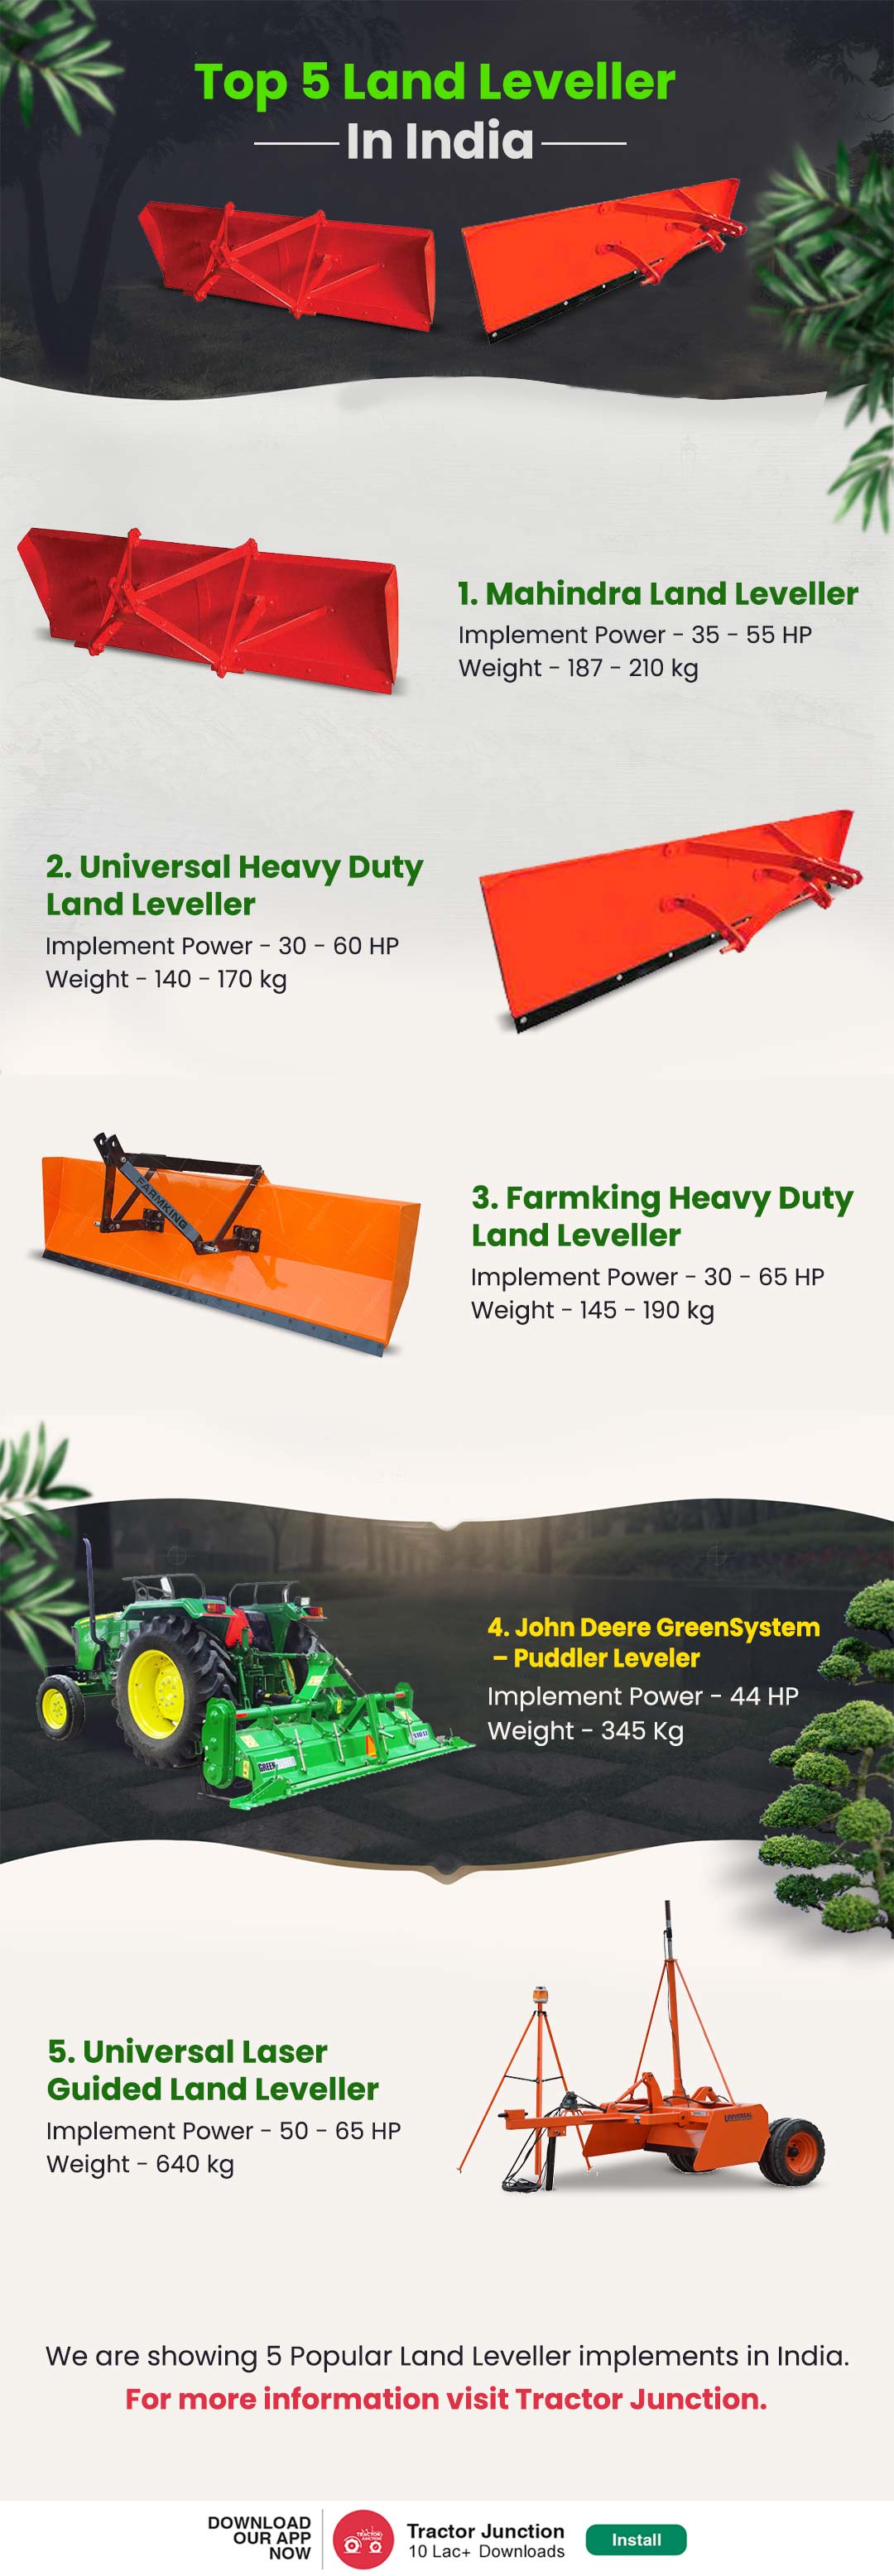 Top 5 Land Leveller In India Infographic